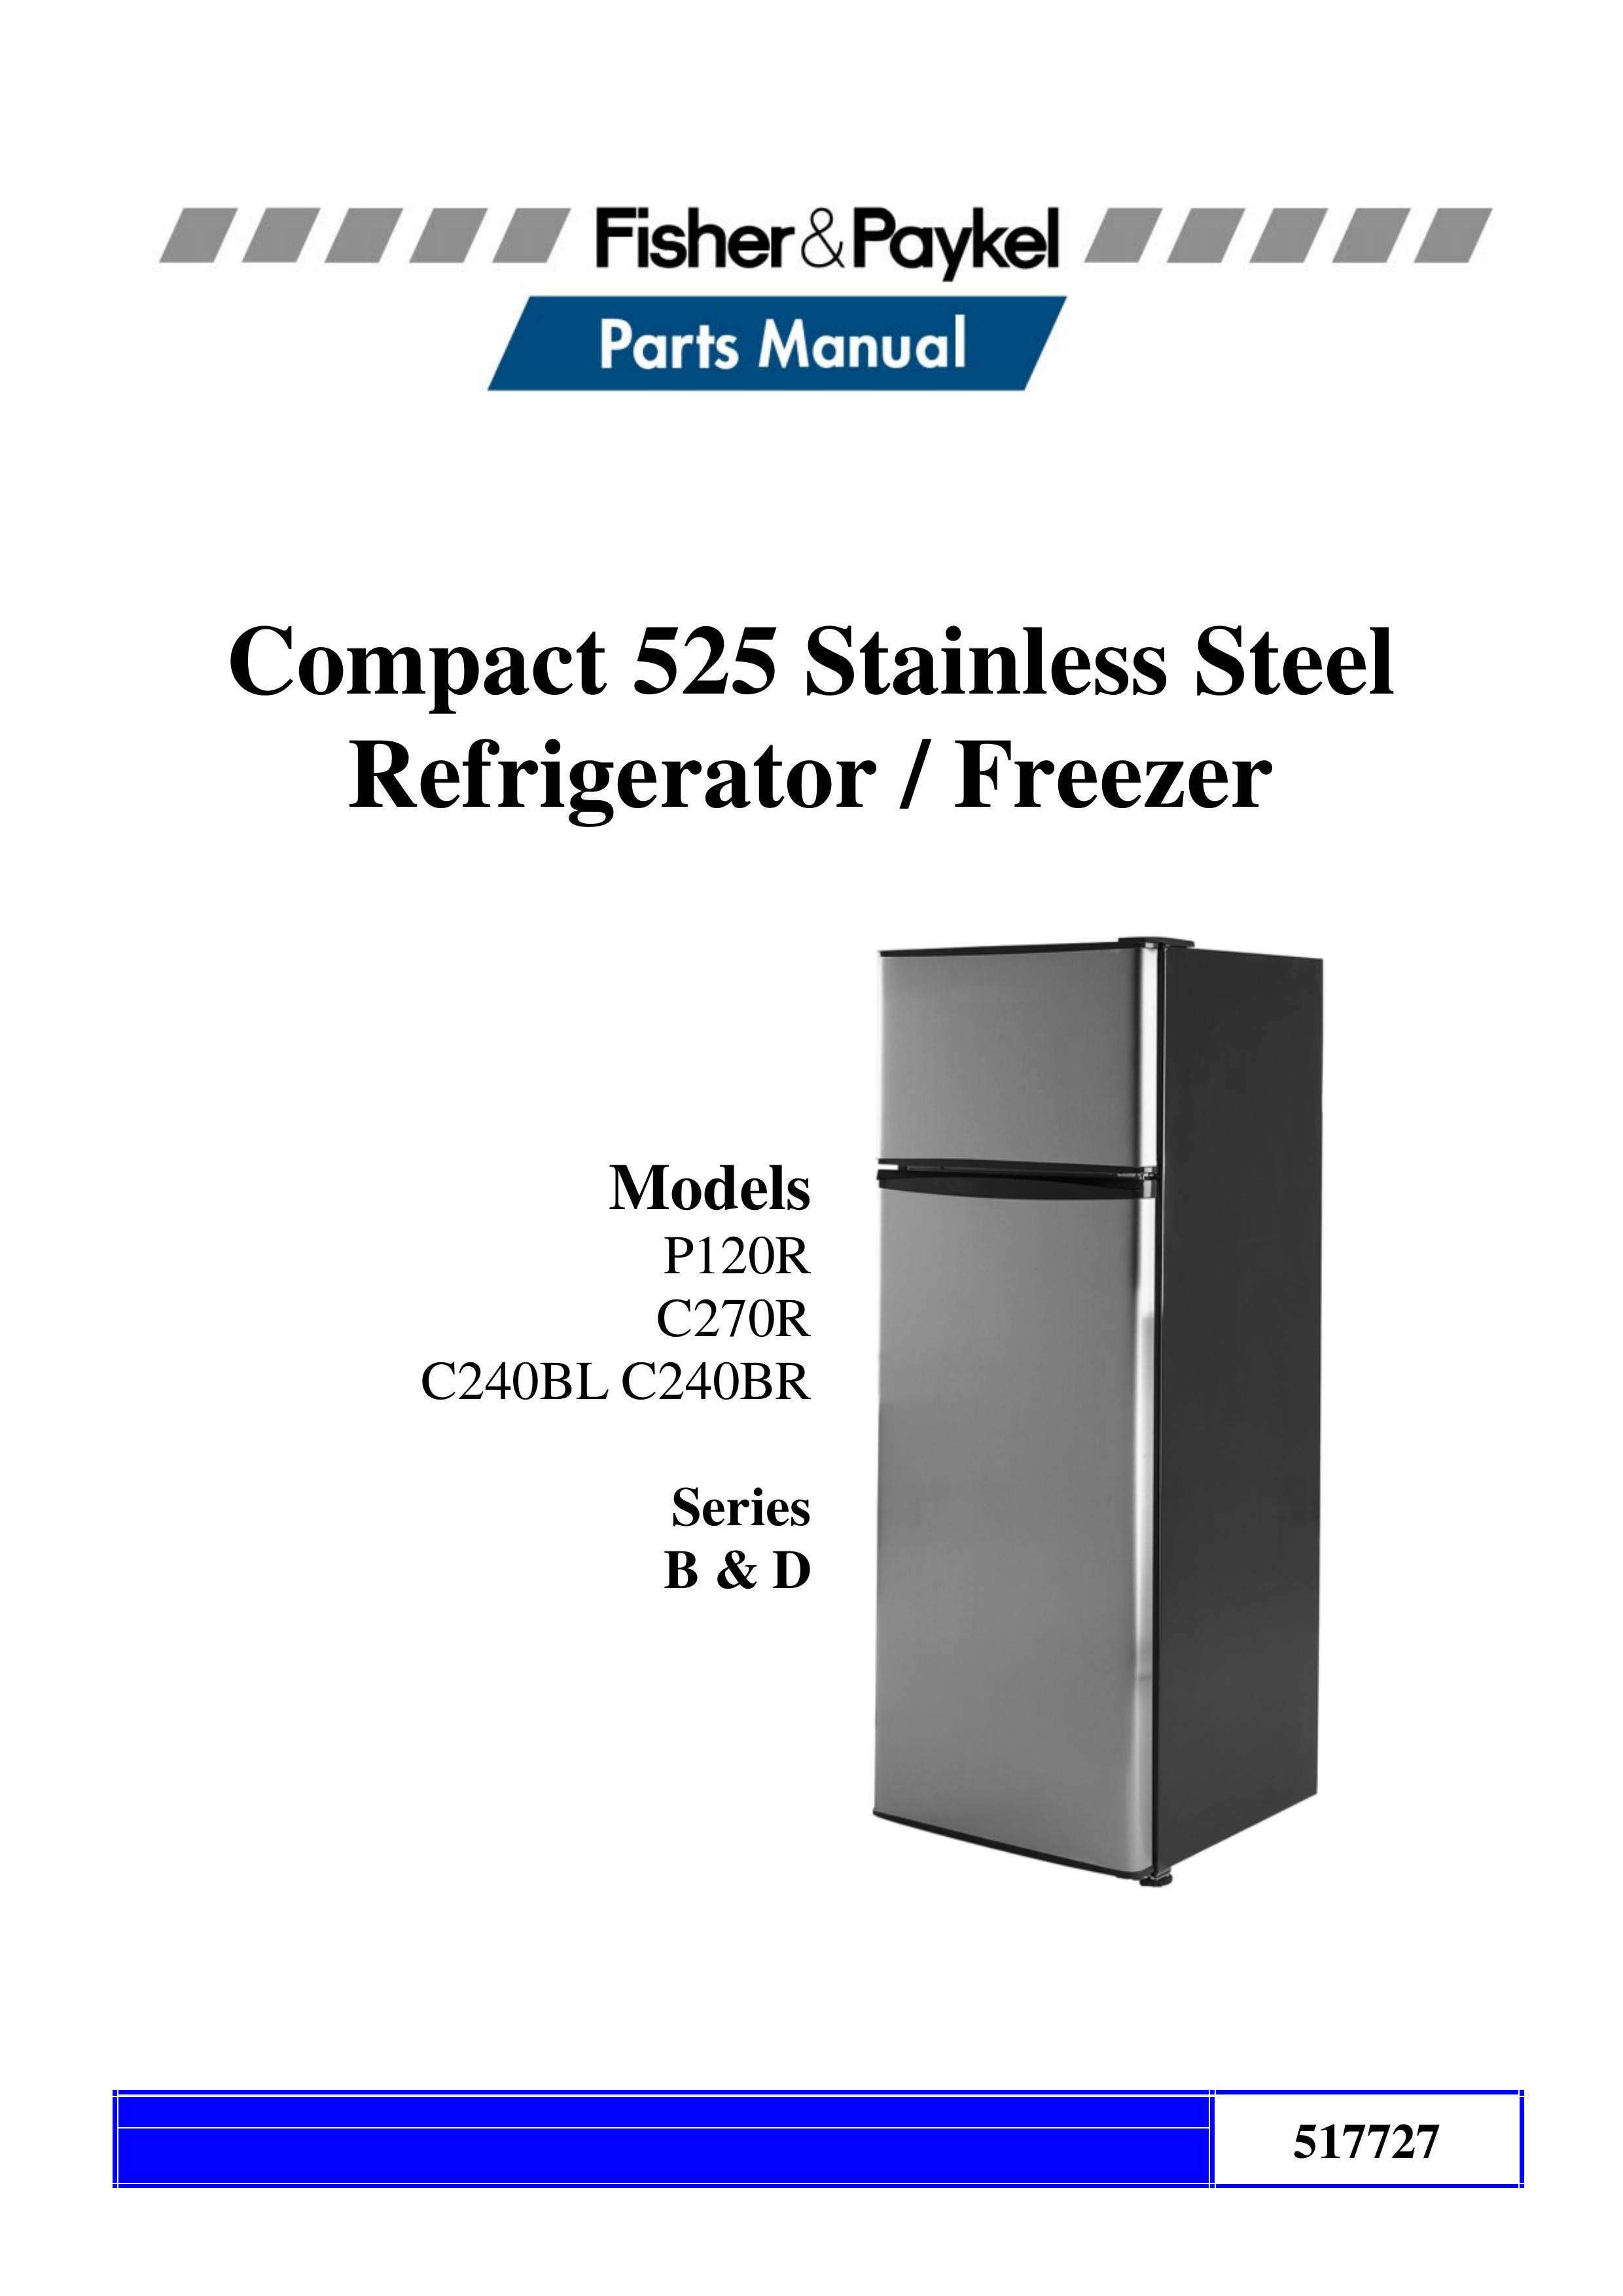 Fisher & Paykel C240BLC240BR Refrigerator User Manual